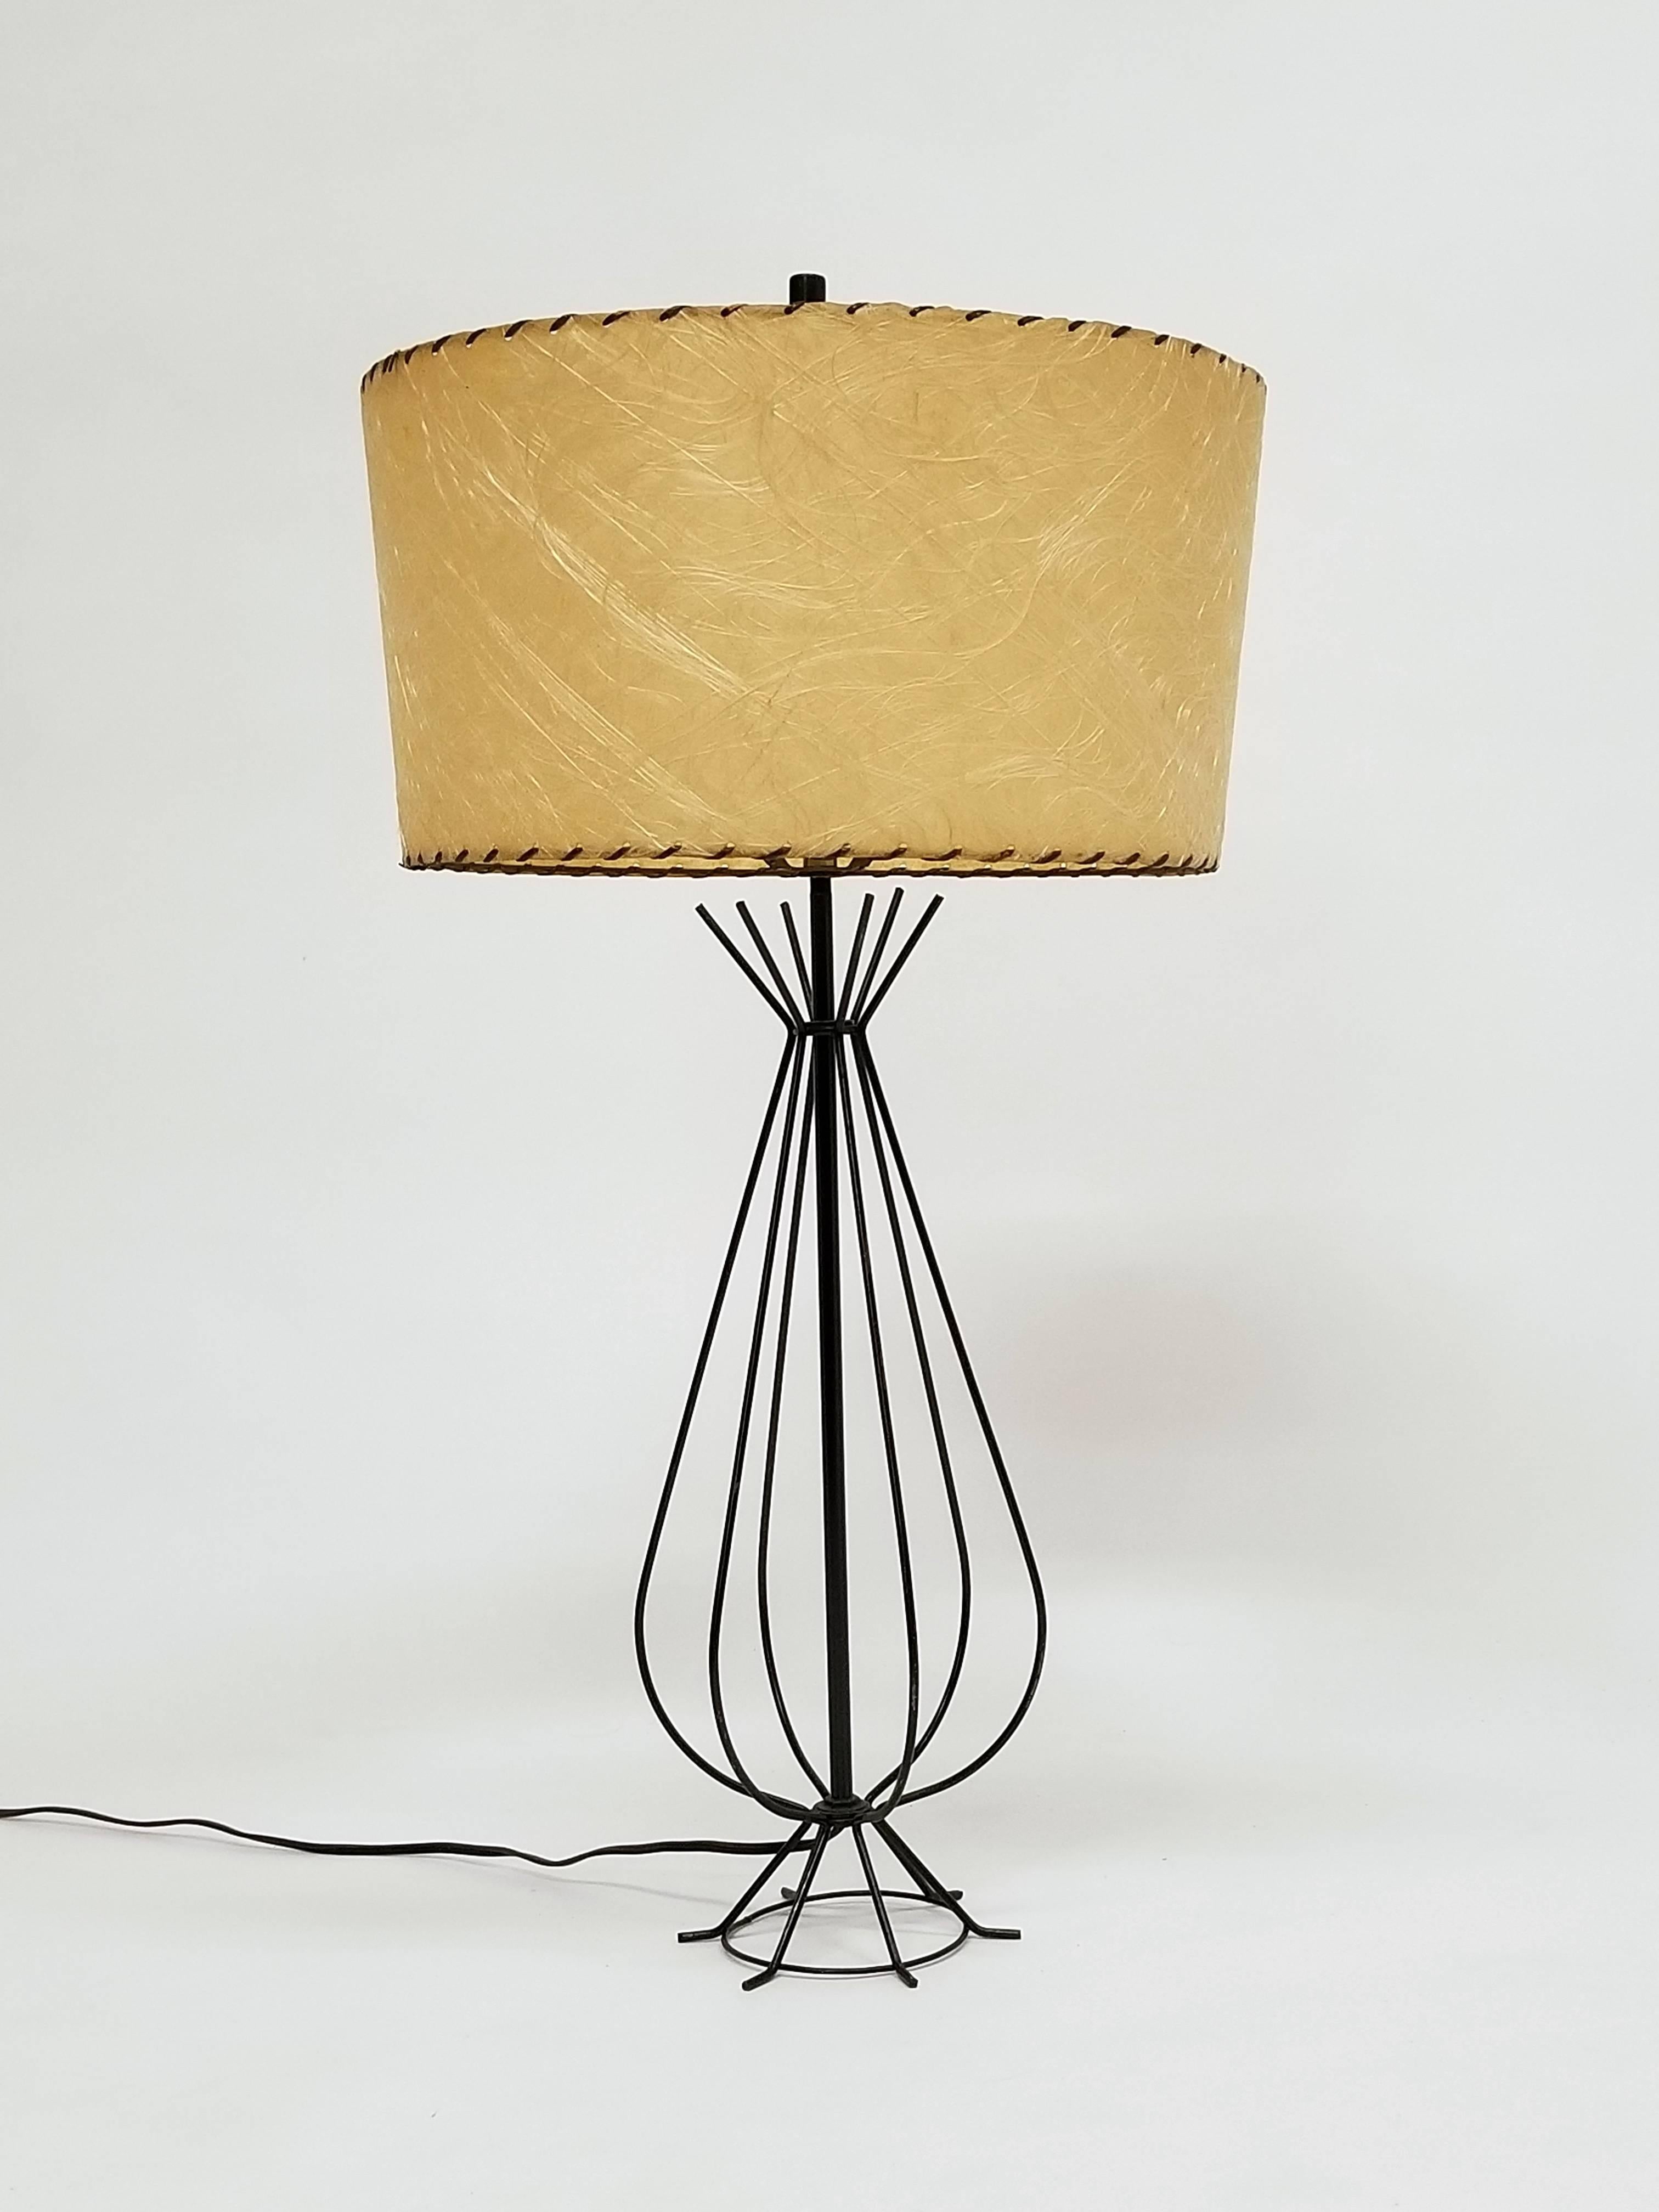 Enameled wire table lamp with fiberglass shade (come with order).

Lamp measure 21 in high by 21 in wide, 29 in with shade on.

Shade measure 15.25 in wide by 8 in high. 

Regular E26 size socket rated at 60 watt max.

Original wiring.